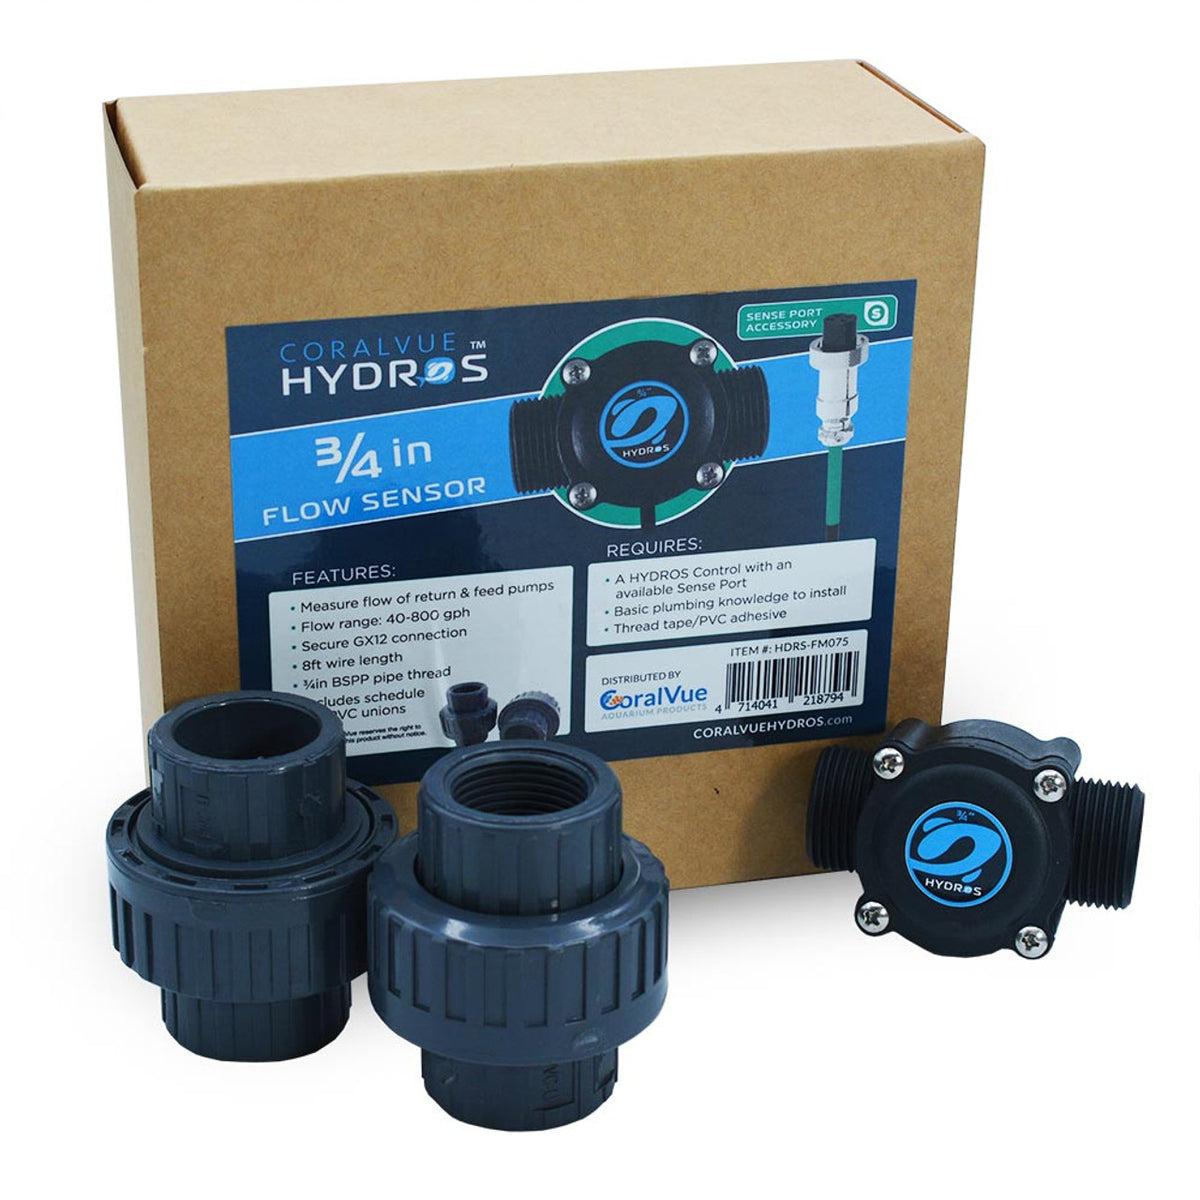 Hydrolics flanged hose fittings kit with a TAS HYDROS Flow Sensor.